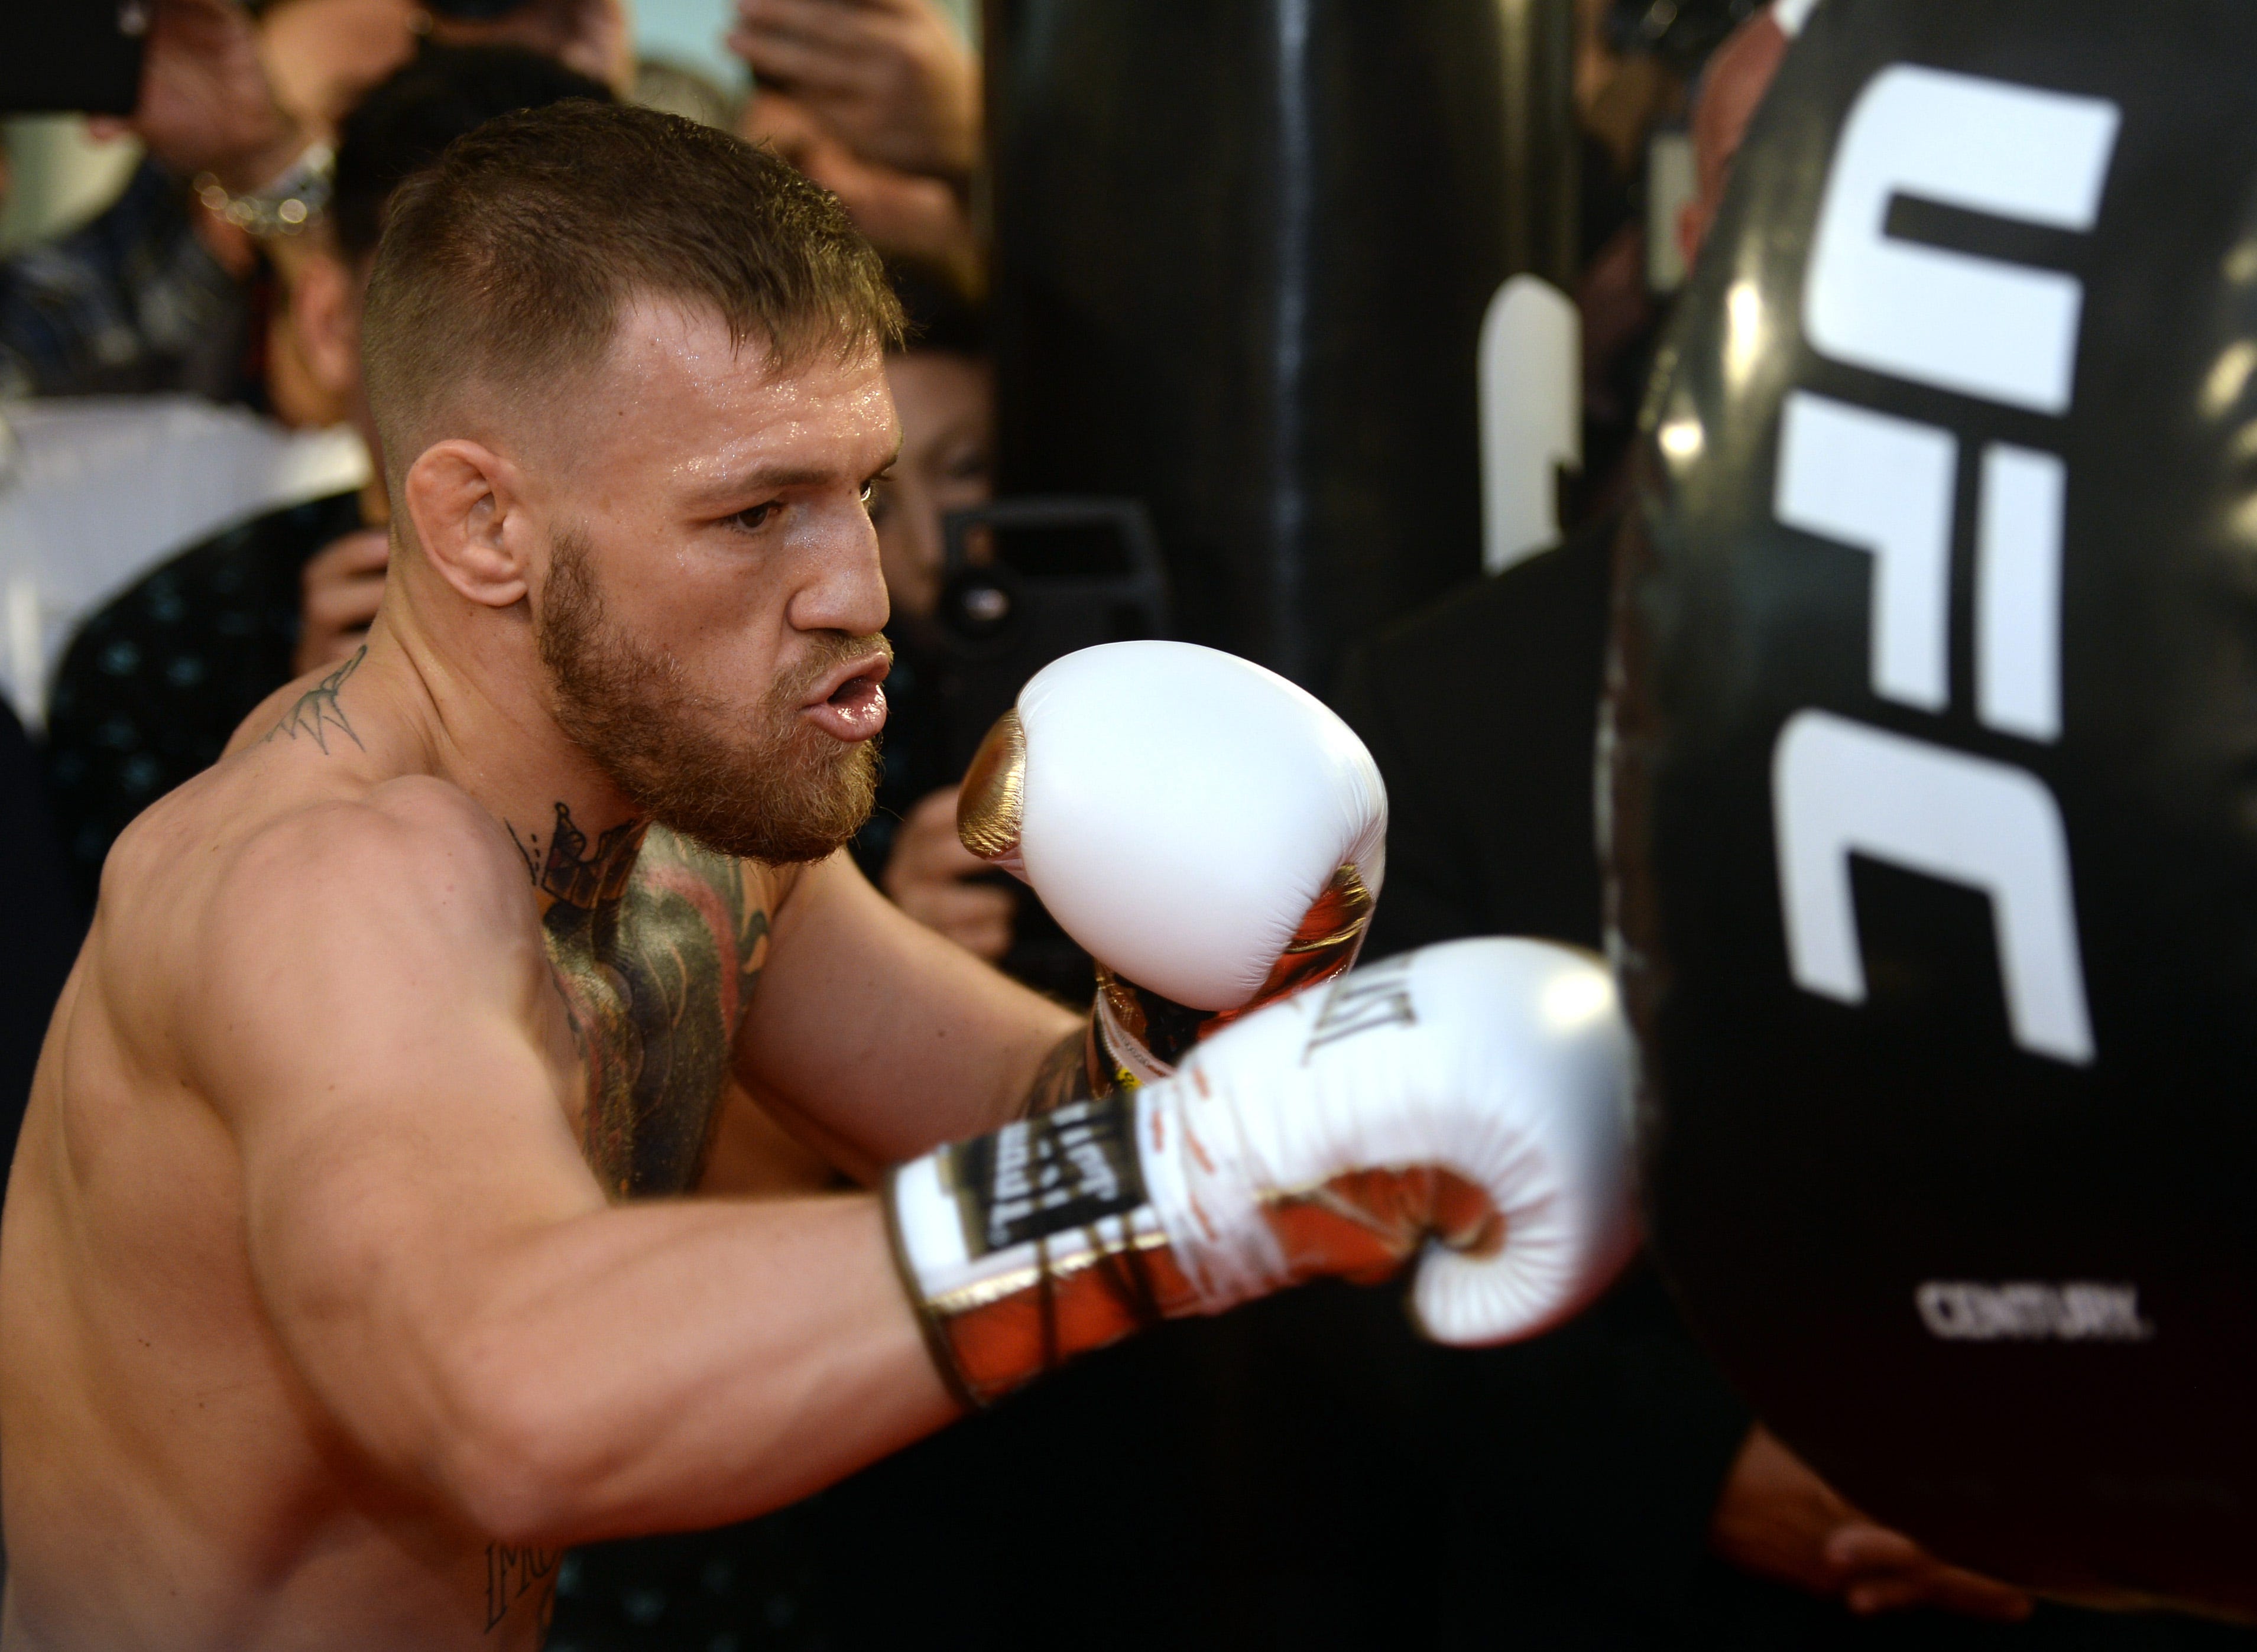 Floyd Mayweather thinks Conor McGregor will fight &apos;extremely dirty&apos;